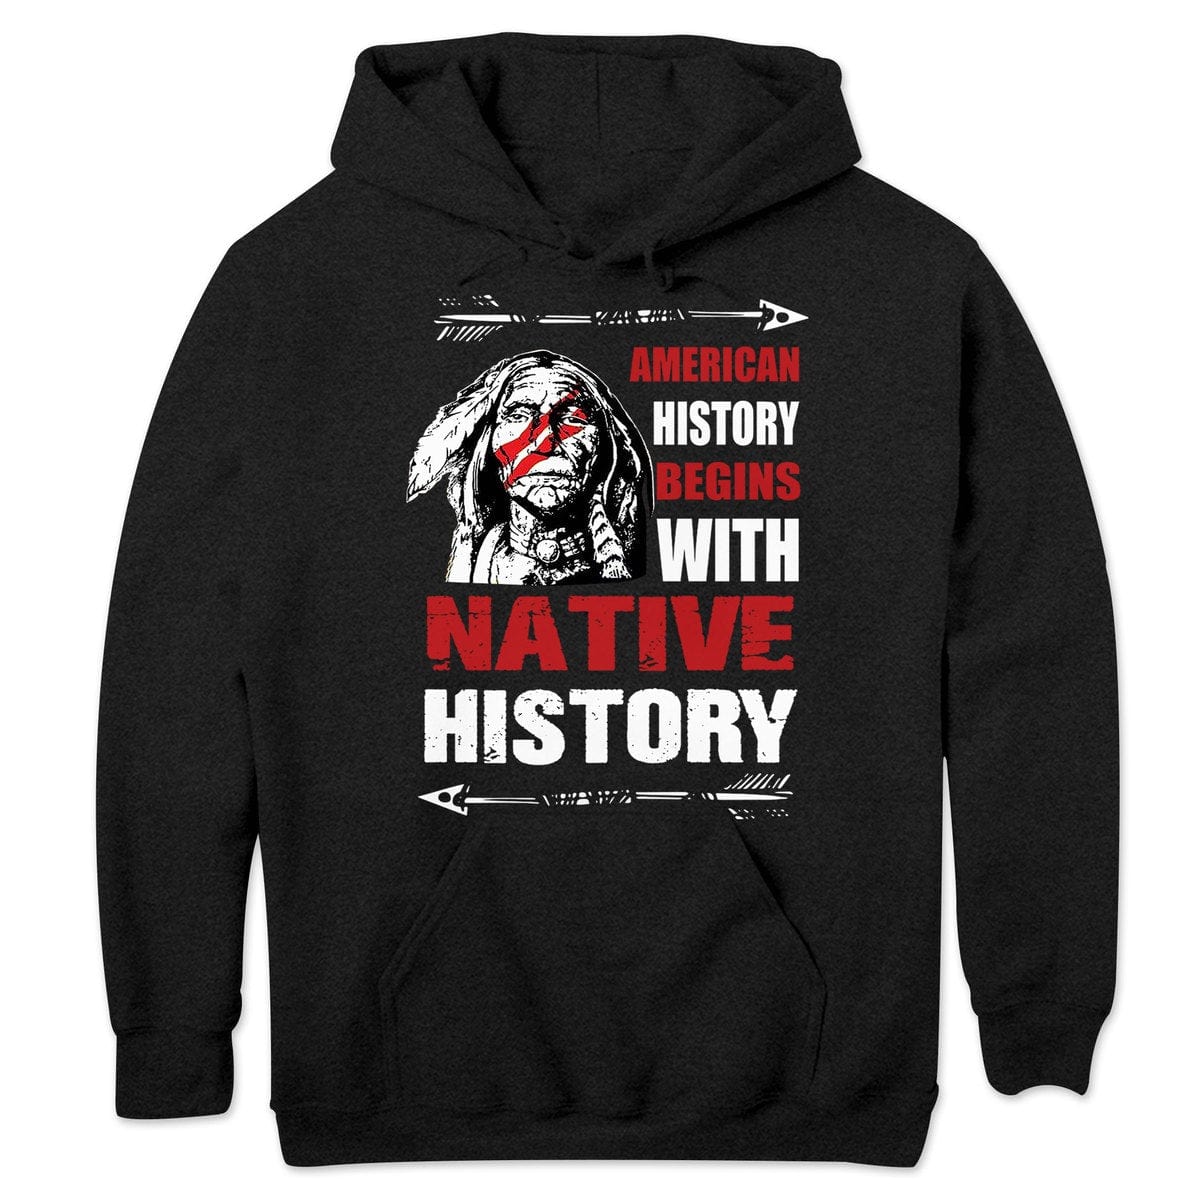 American History Begins With Native History Hoodie, Shirts